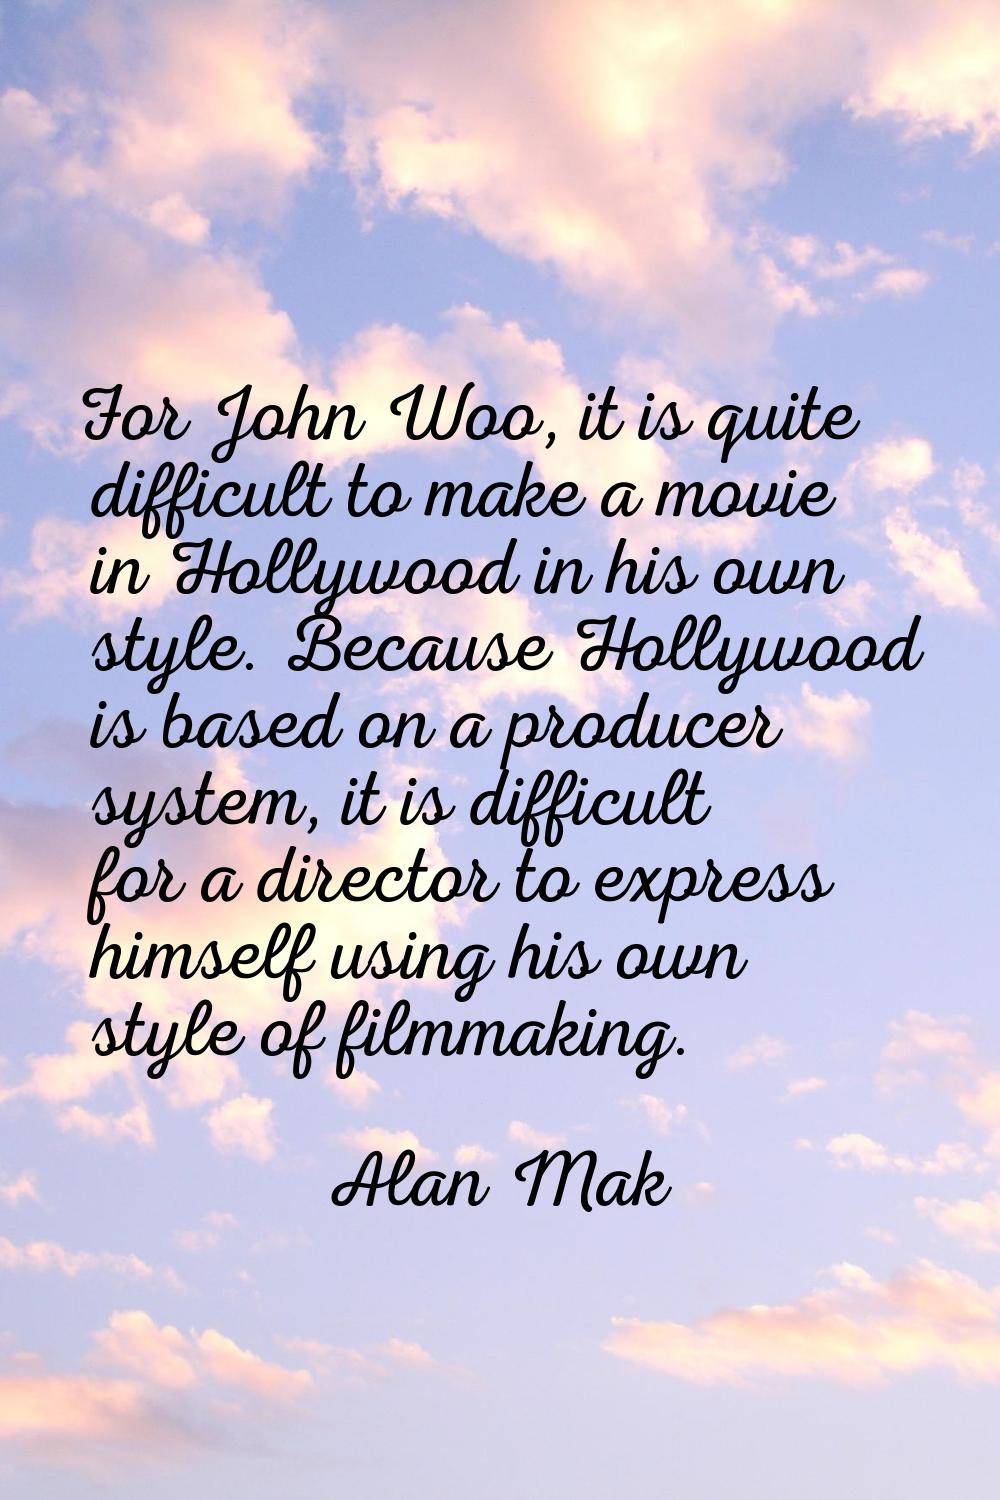 For John Woo, it is quite difficult to make a movie in Hollywood in his own style. Because Hollywoo